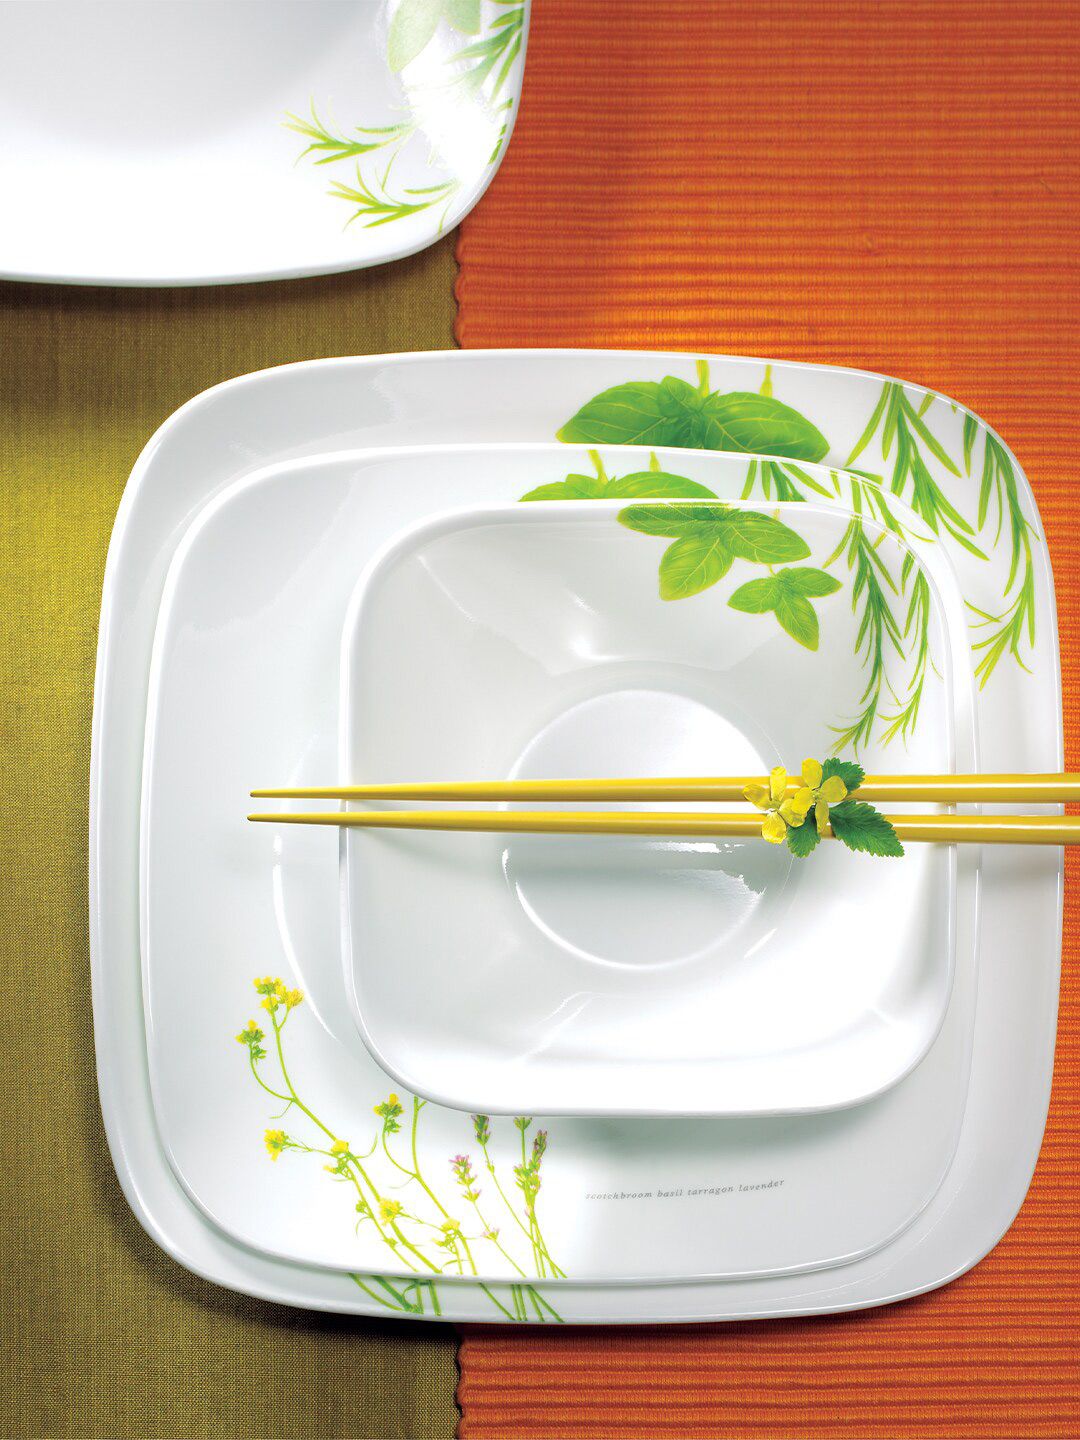 Corelle White & 6 Pieces Floral Printed Glossy Plates Price in India